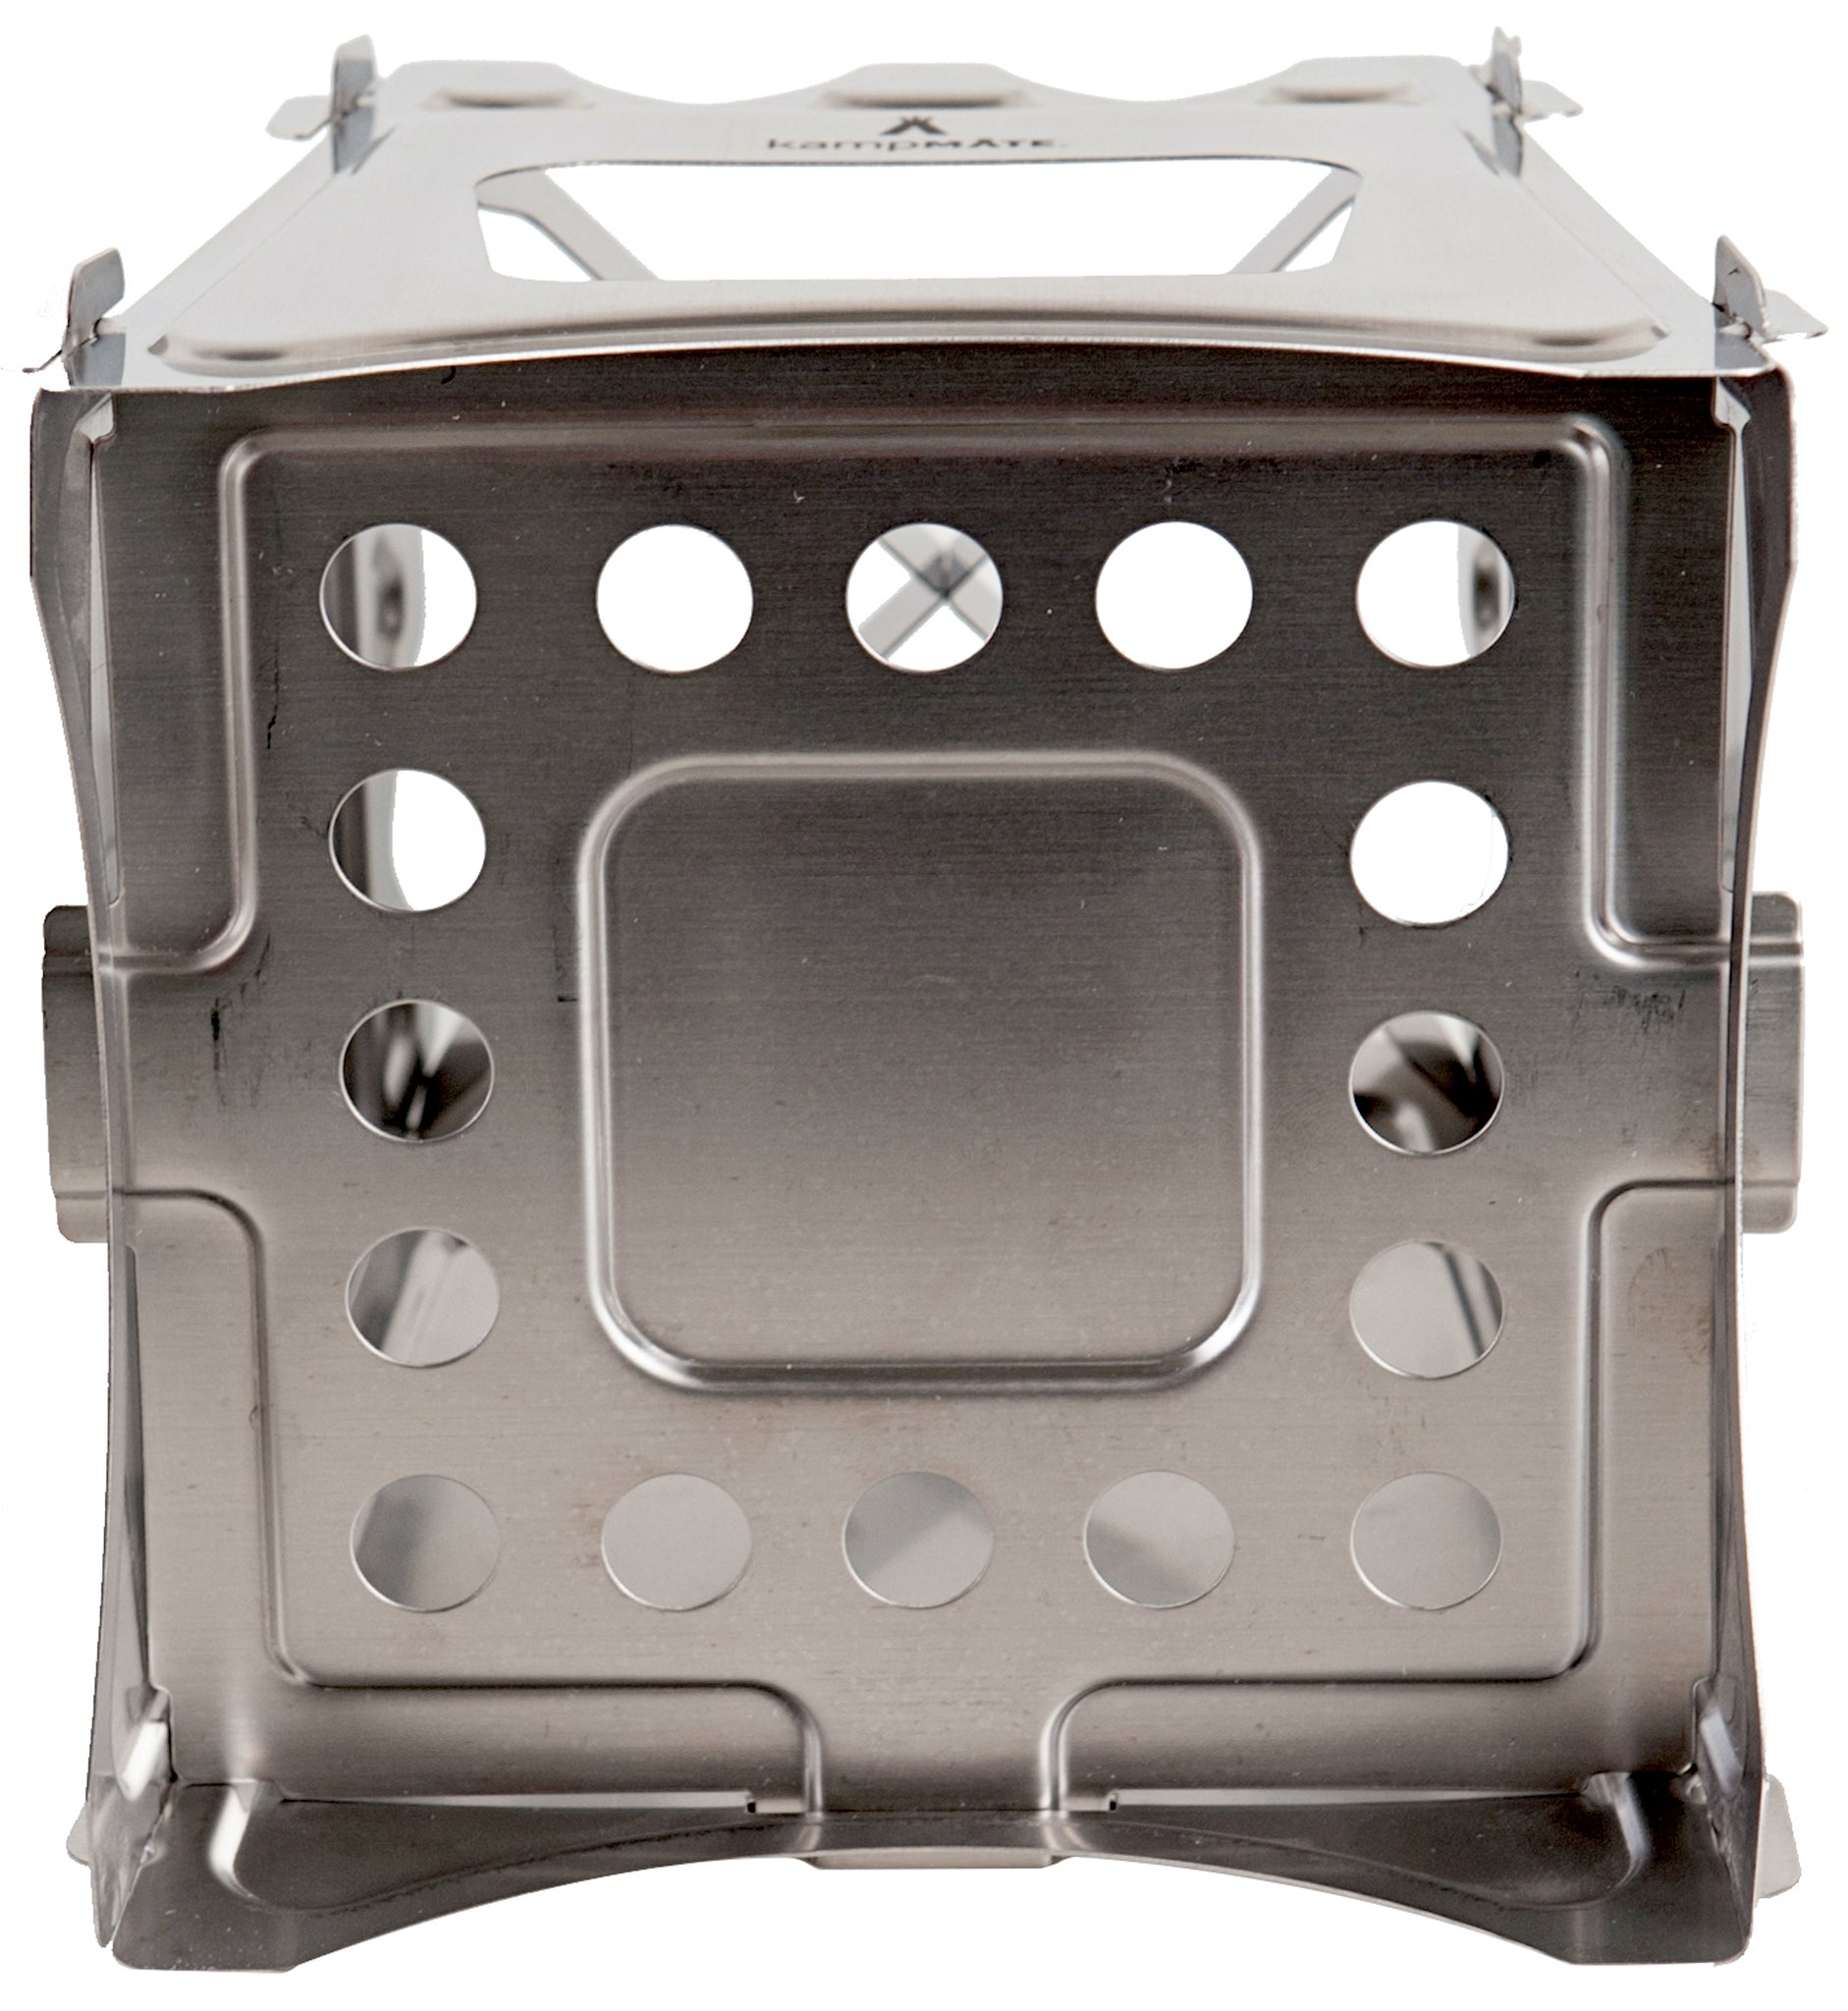 Portable Camping Stove – Extremus